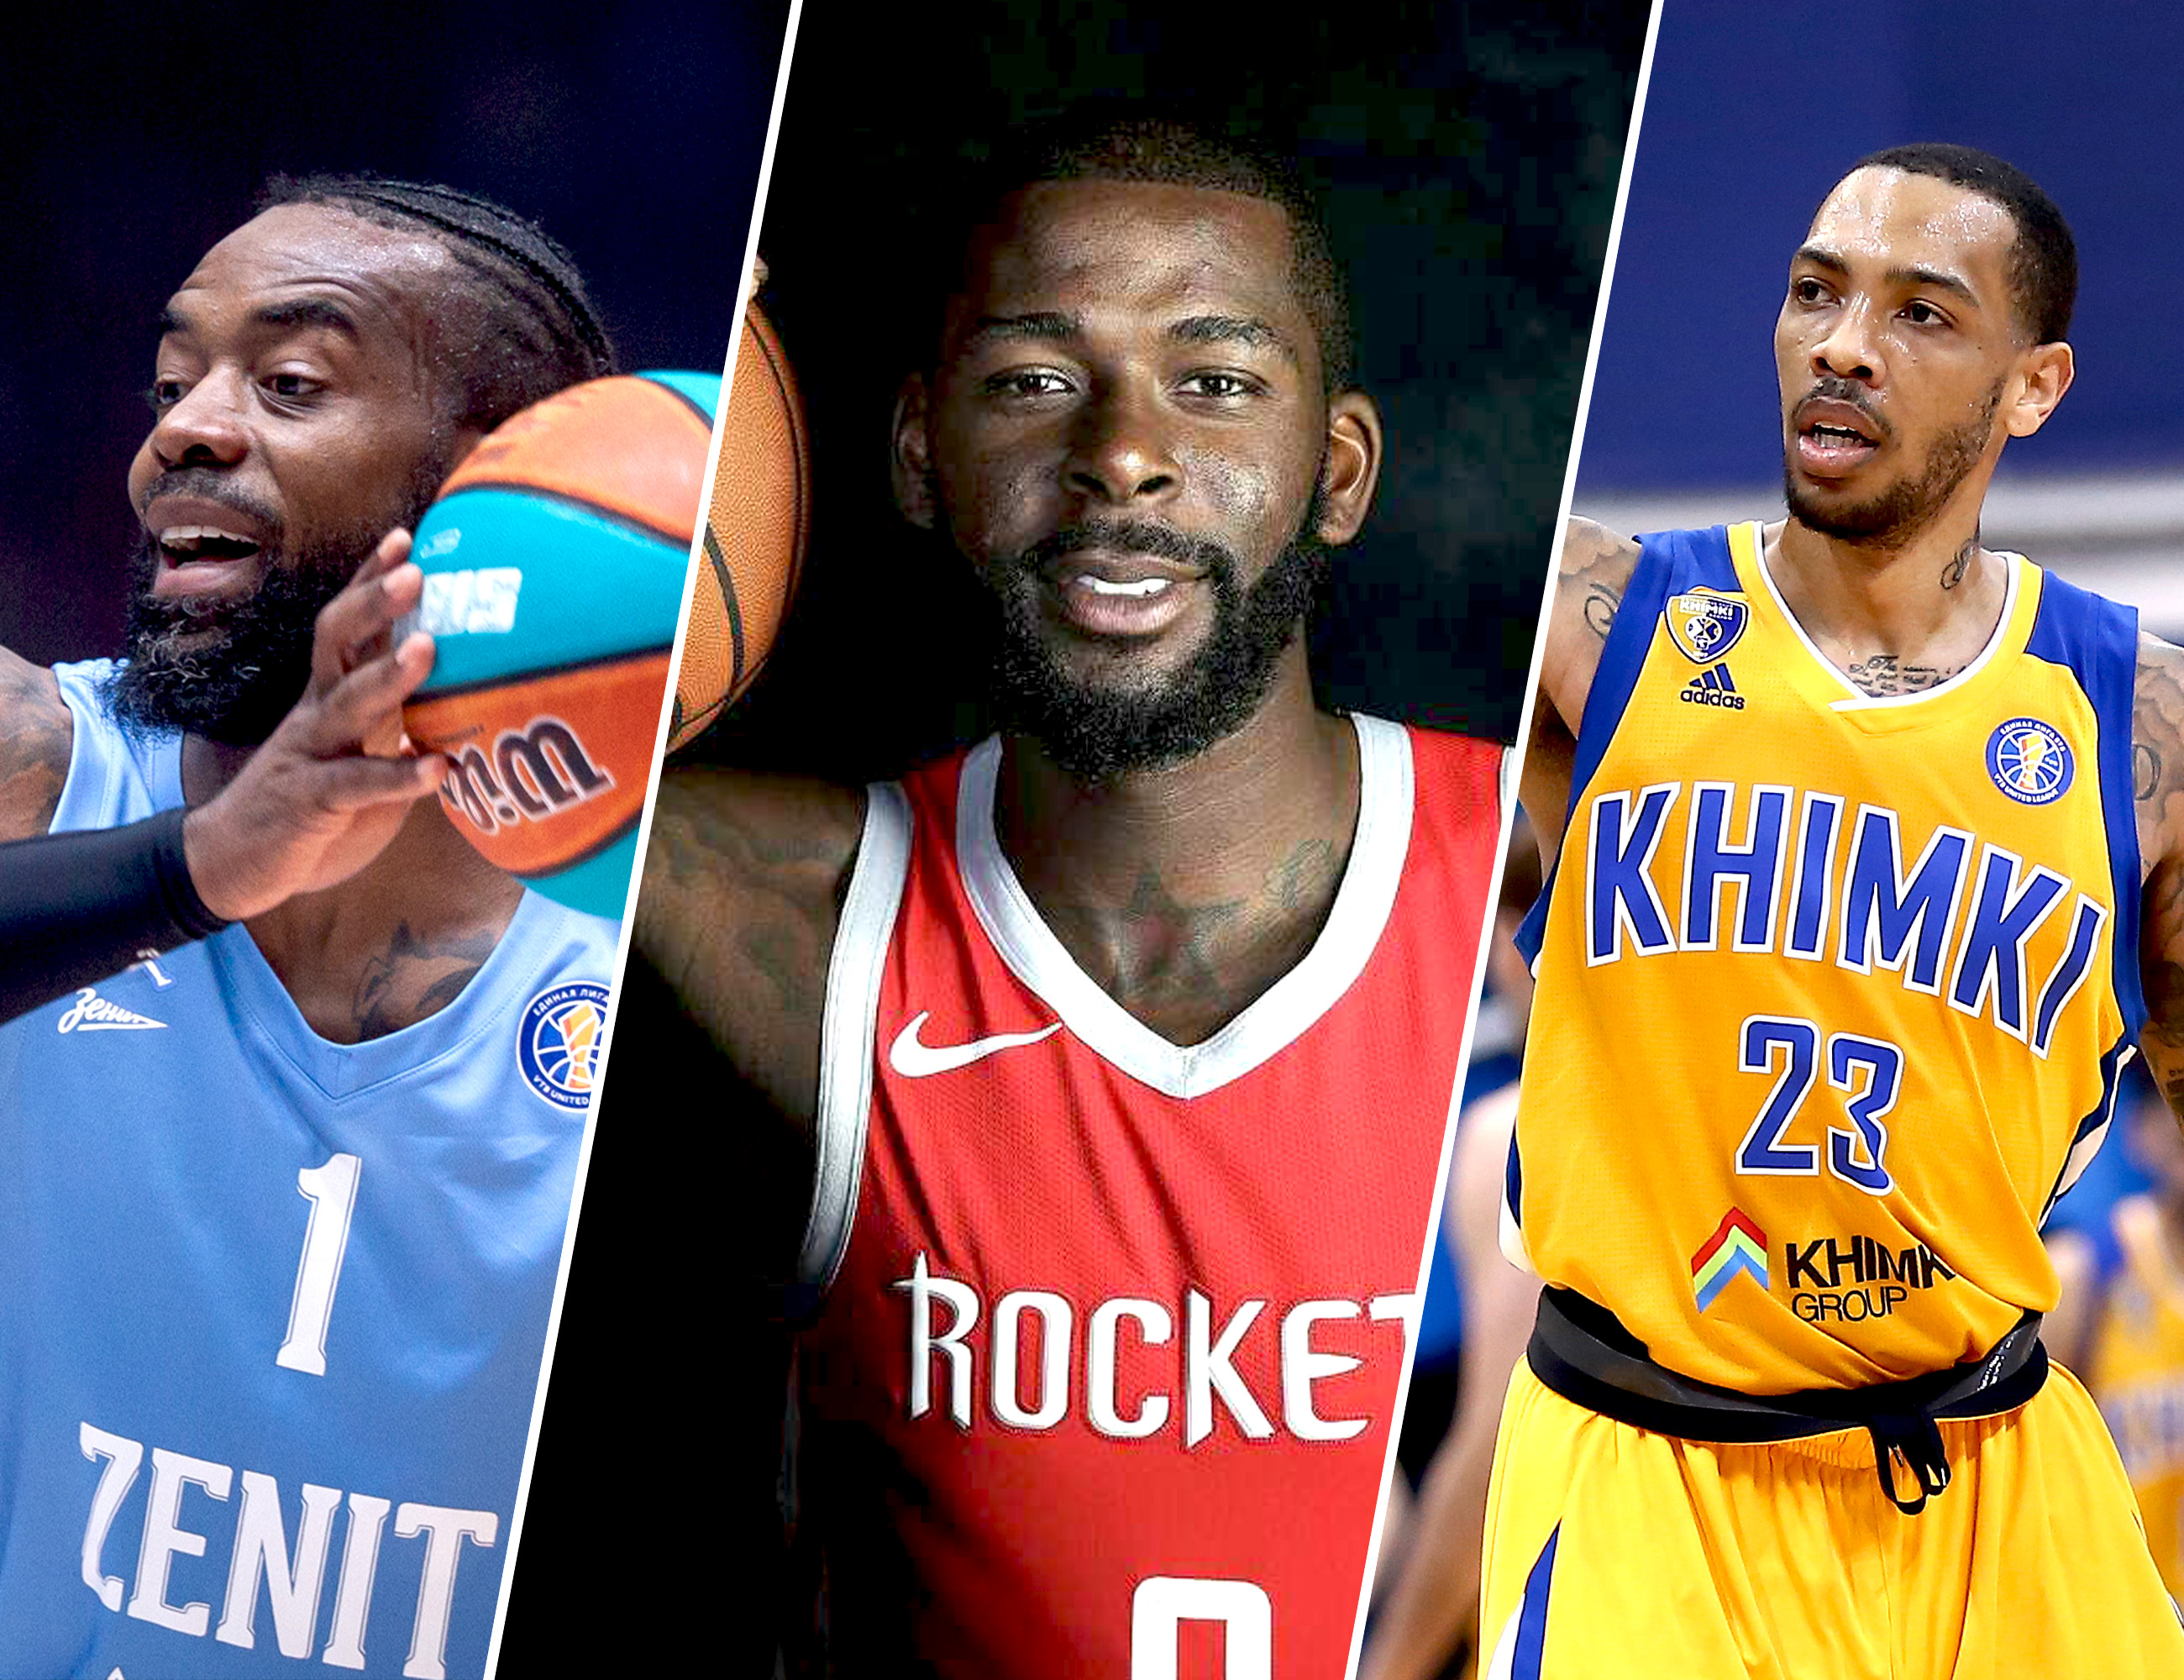 Ennis and Rivers join Samara, Salash goes to NN, Likhodei is in Astana. Transfers in August.